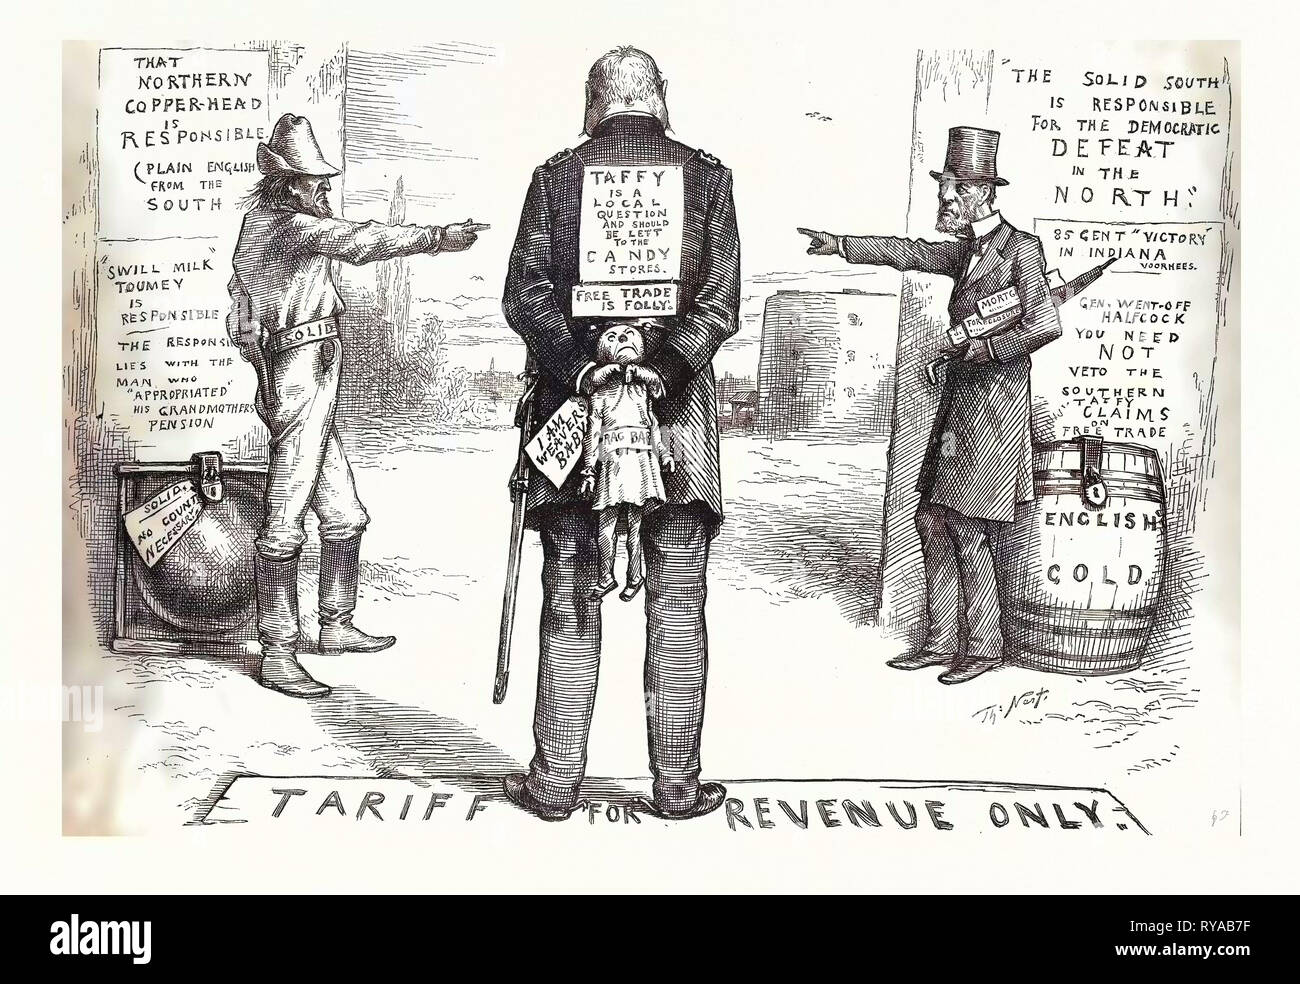 Change is Necessary, 'Who Should Withdraw?' Engraving 1880, US, USA, America, Politics, Political, Politic, Campaign, Patriotic, US, USA, America, United States, American, Engraving 1880 Stock Photo